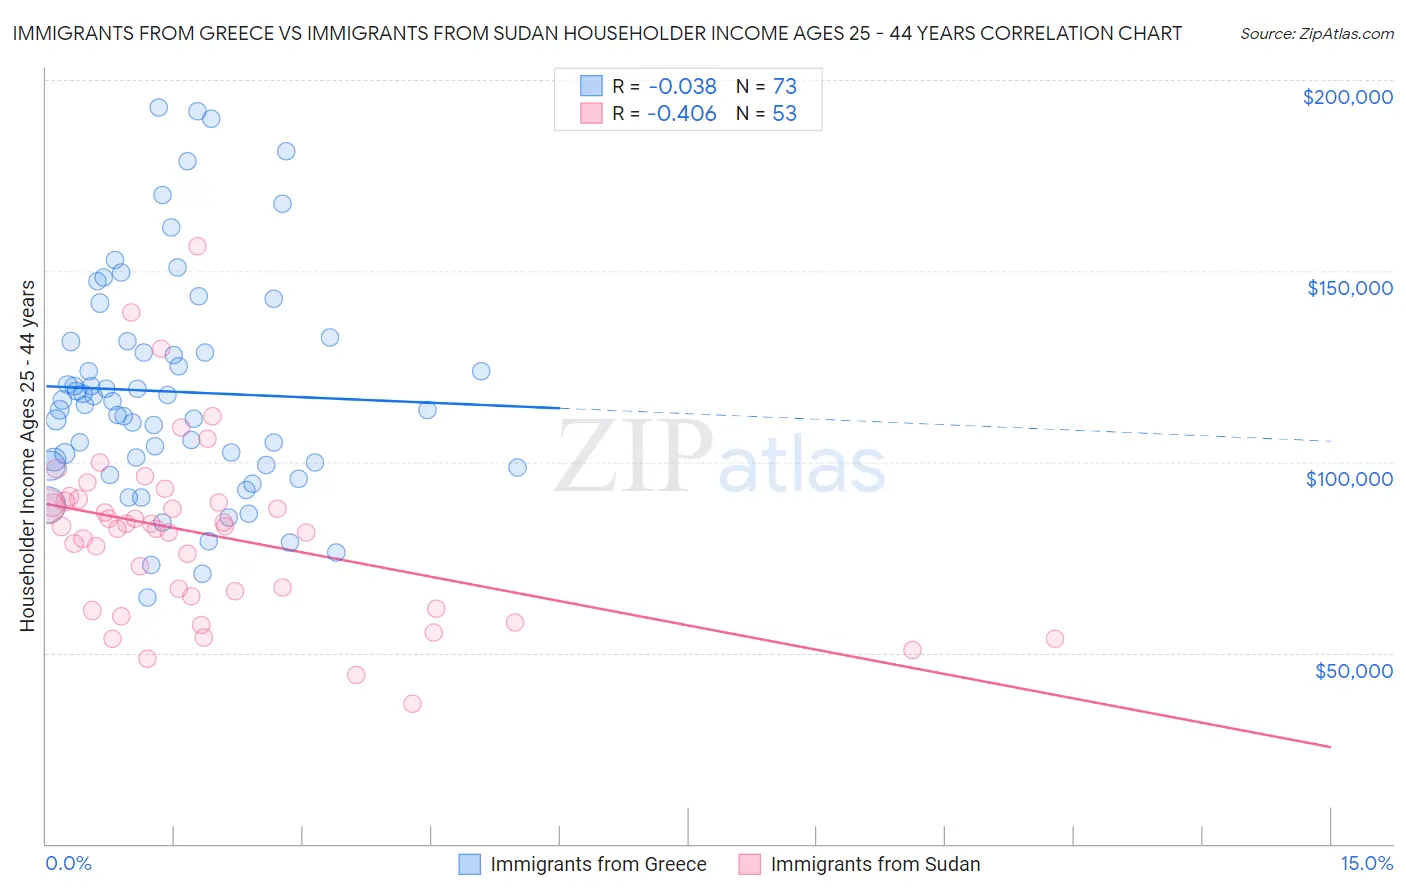 Immigrants from Greece vs Immigrants from Sudan Householder Income Ages 25 - 44 years